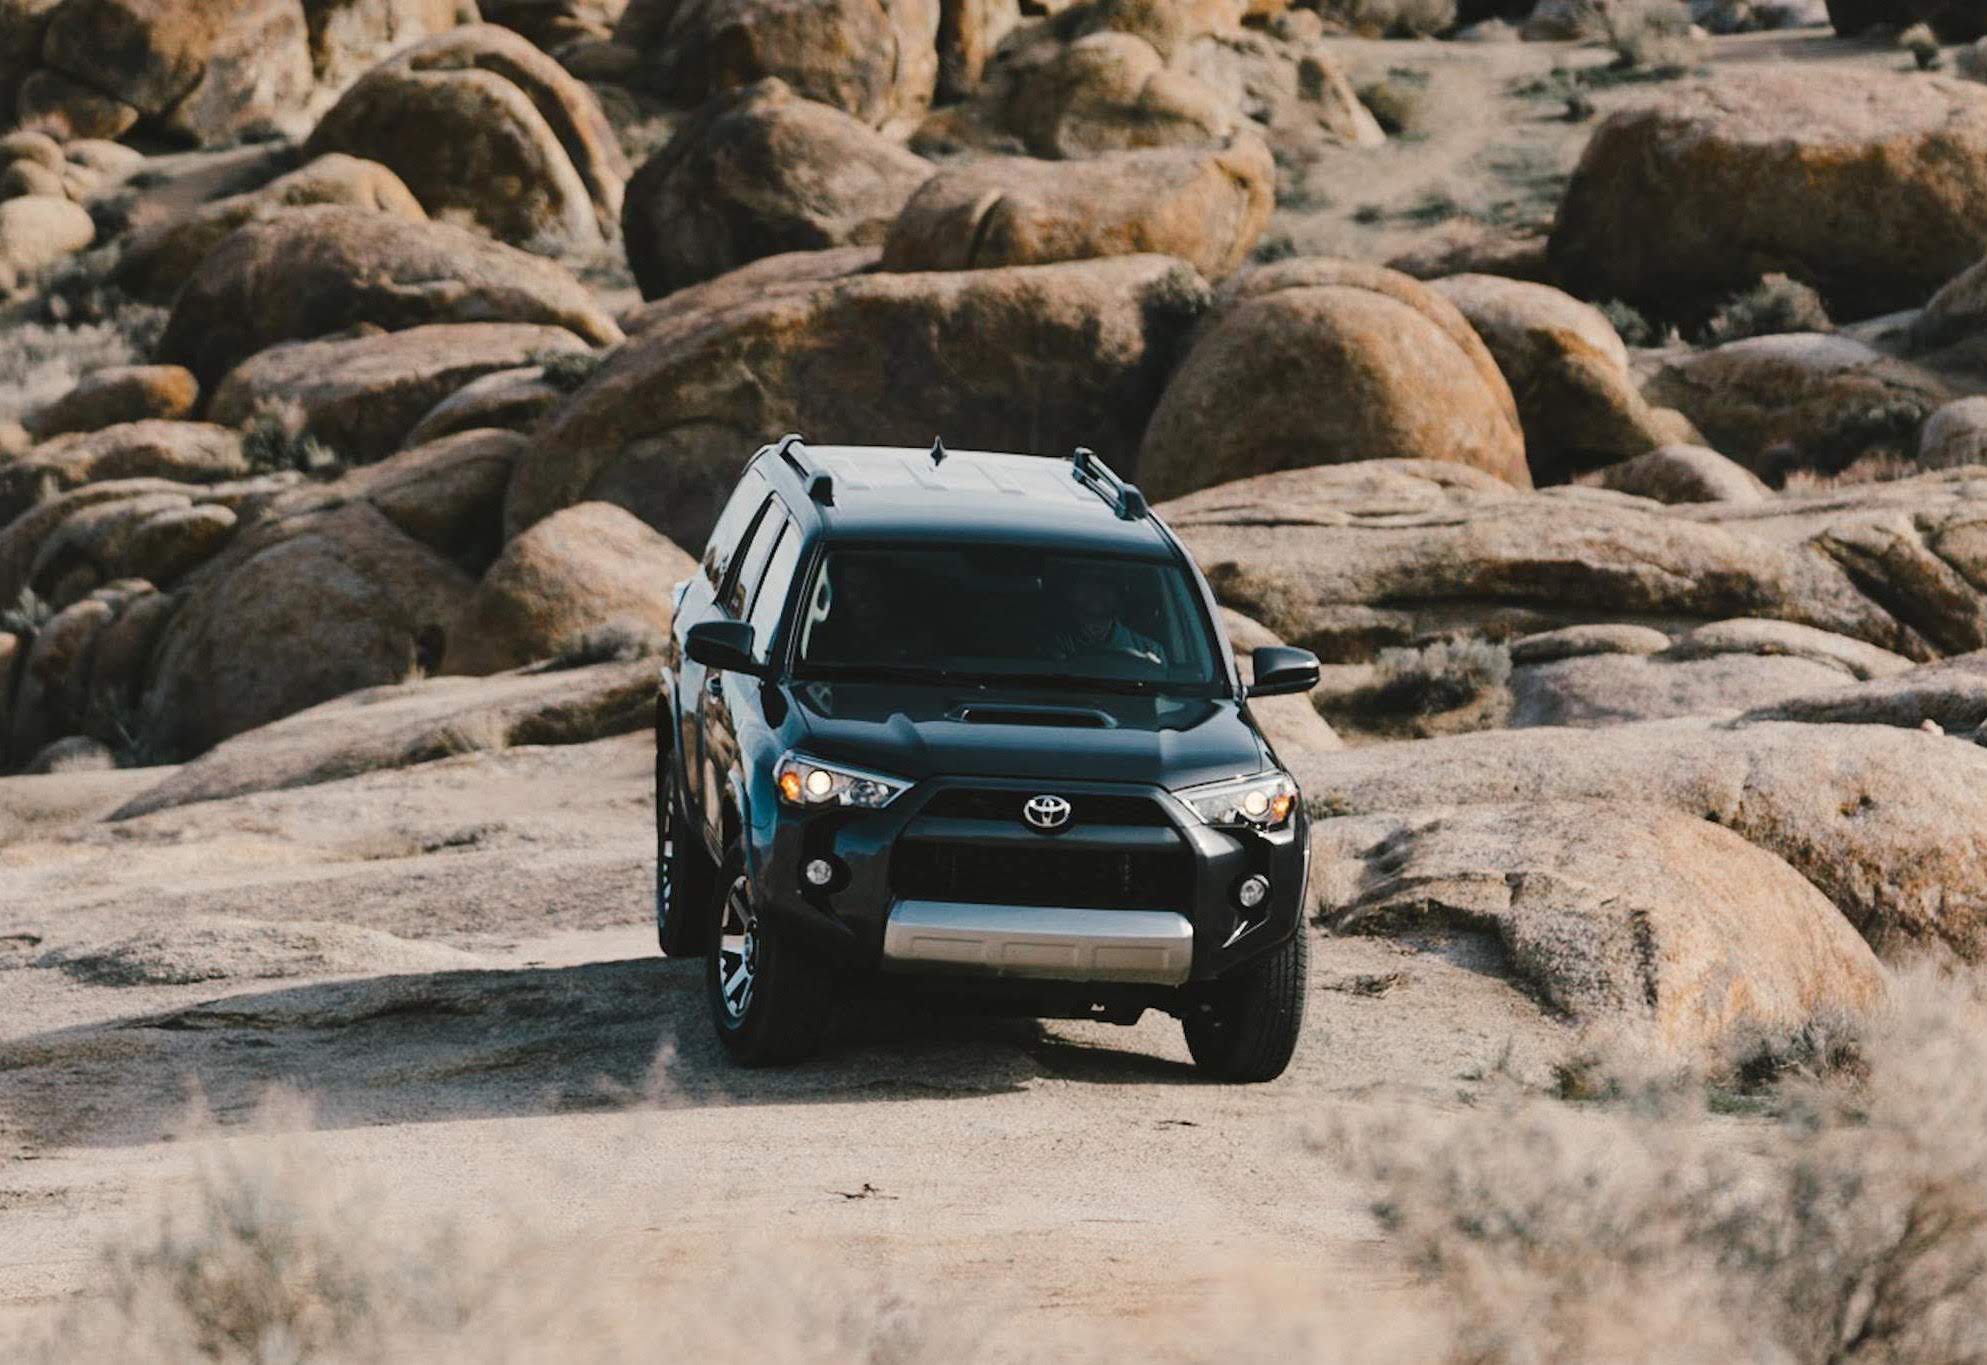 Toyota 4Runner could be the luxury SUV that we want.